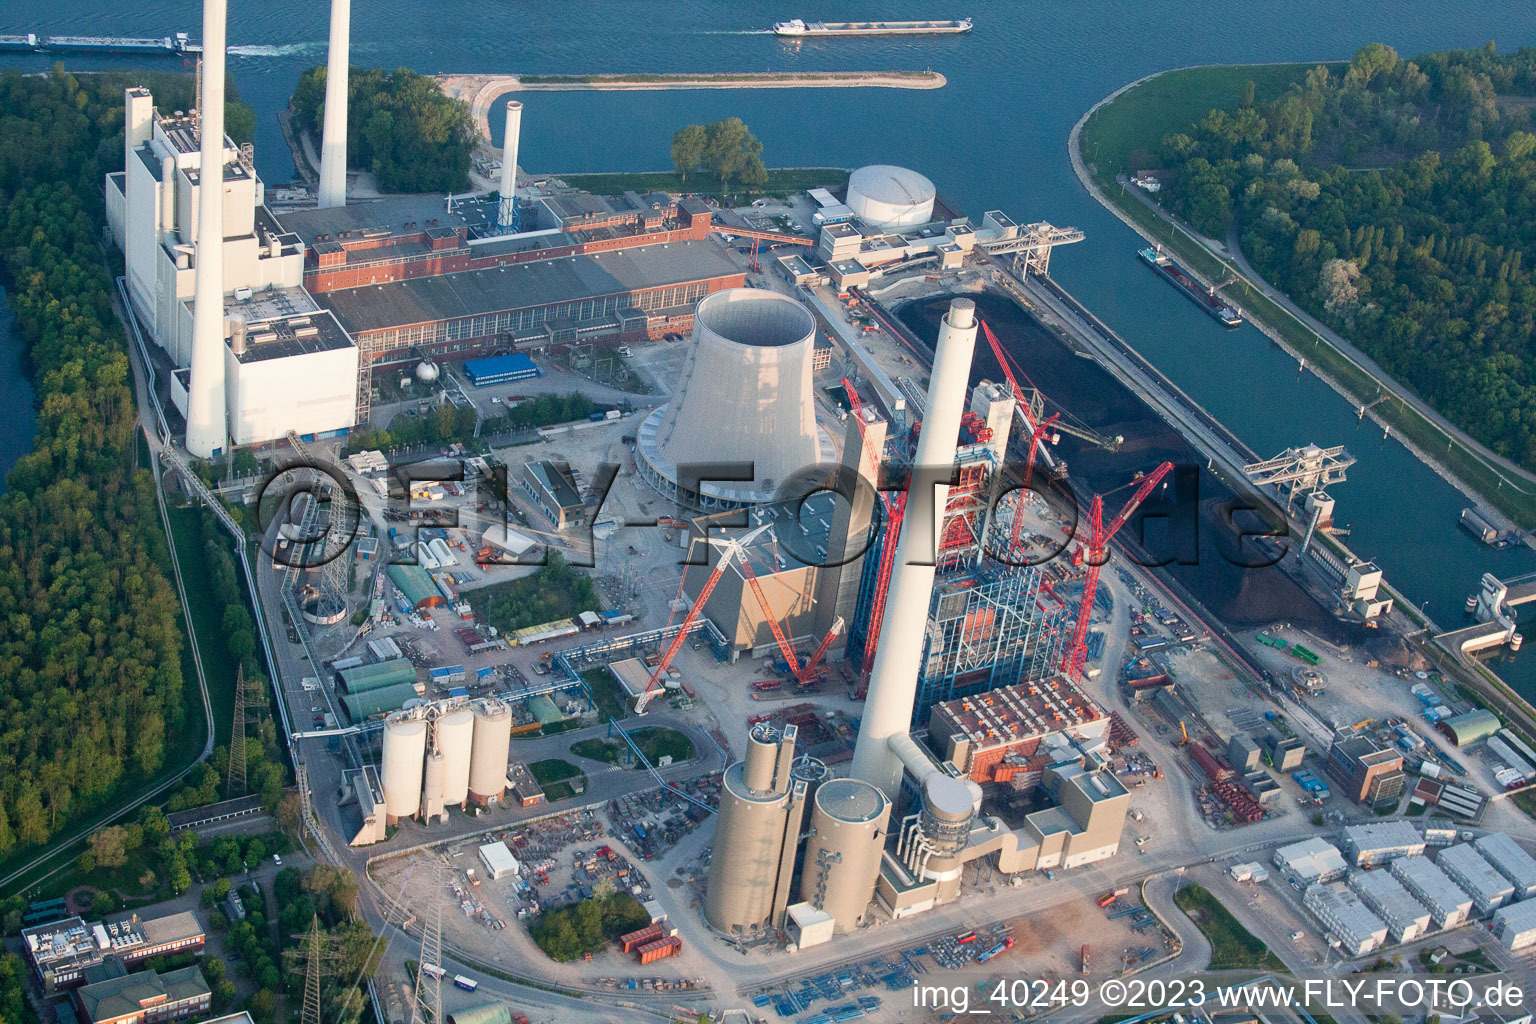 ENBW construction site in the district Rheinhafen in Karlsruhe in the state Baden-Wuerttemberg, Germany seen from a drone